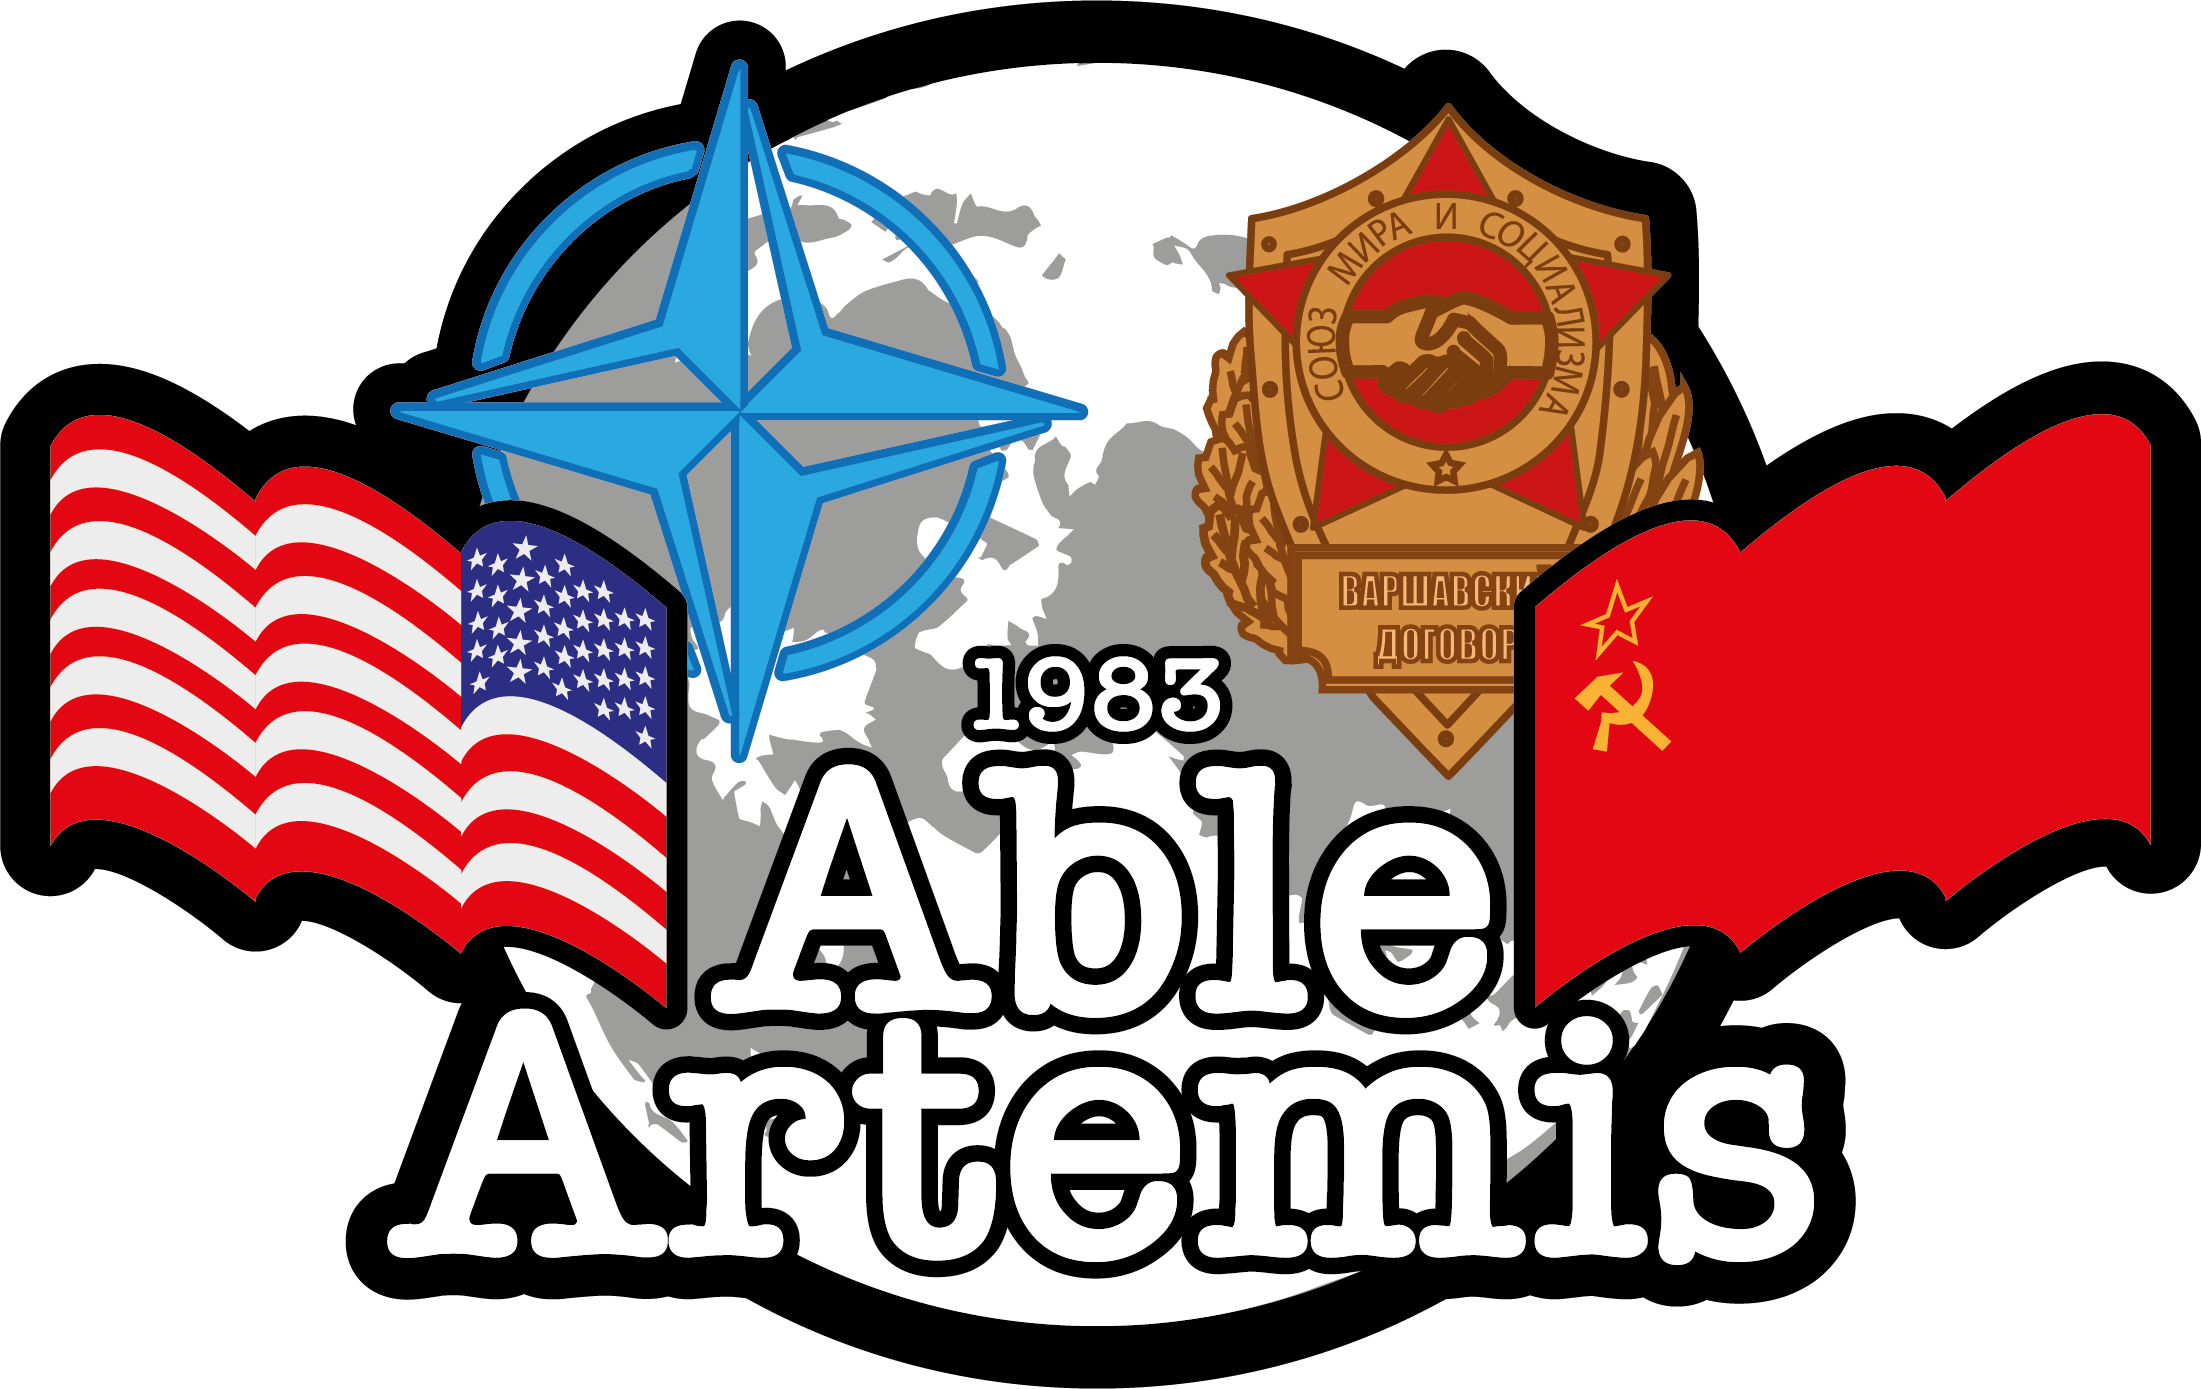 Able Artemis patch logo, US flag and NATO logo on the left, Soviet flag and Soviet military emblem on the right, over a stylised globe